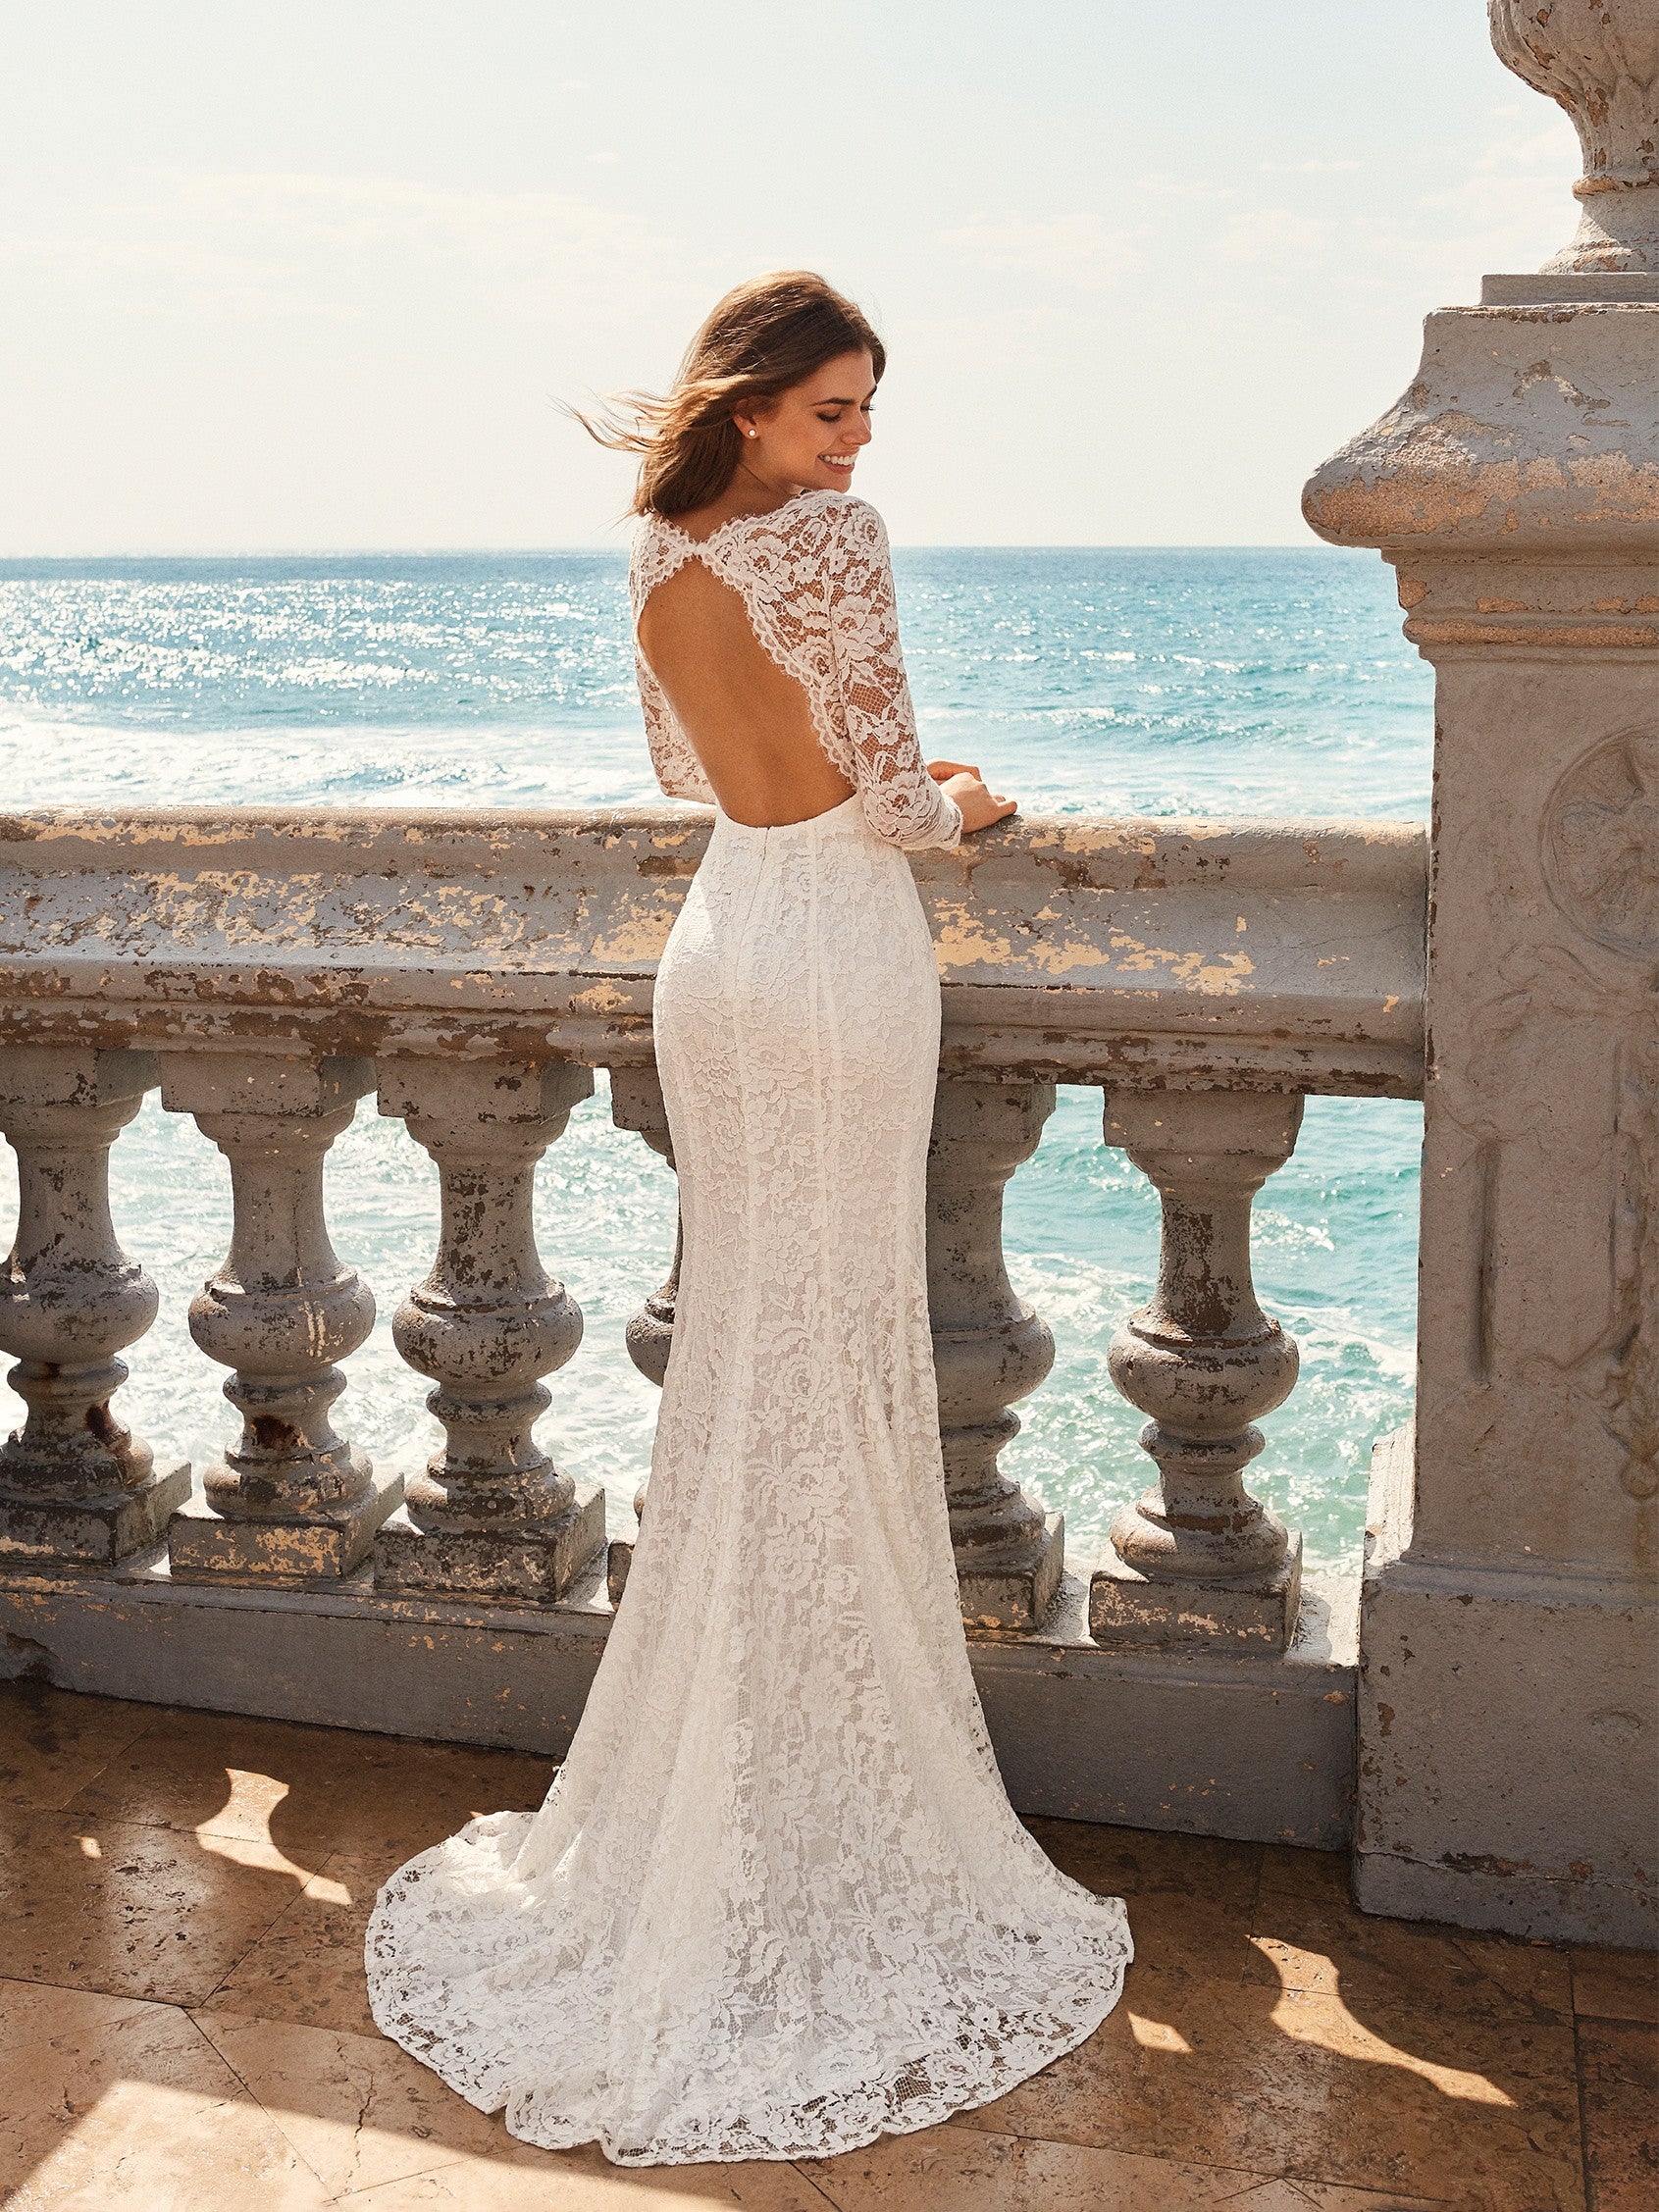 Pronovias White One Bridal JIANNA  Exquisite mermaid style wedding dress in lace. The sweetheart neckline combined with the semi-sheer tulle in the bateau neckline and long sleeves adds lots of sensuality. As does the incredible back.  IN STOCK FOR IMMEDIATE DELIVERY!  Size US 10    